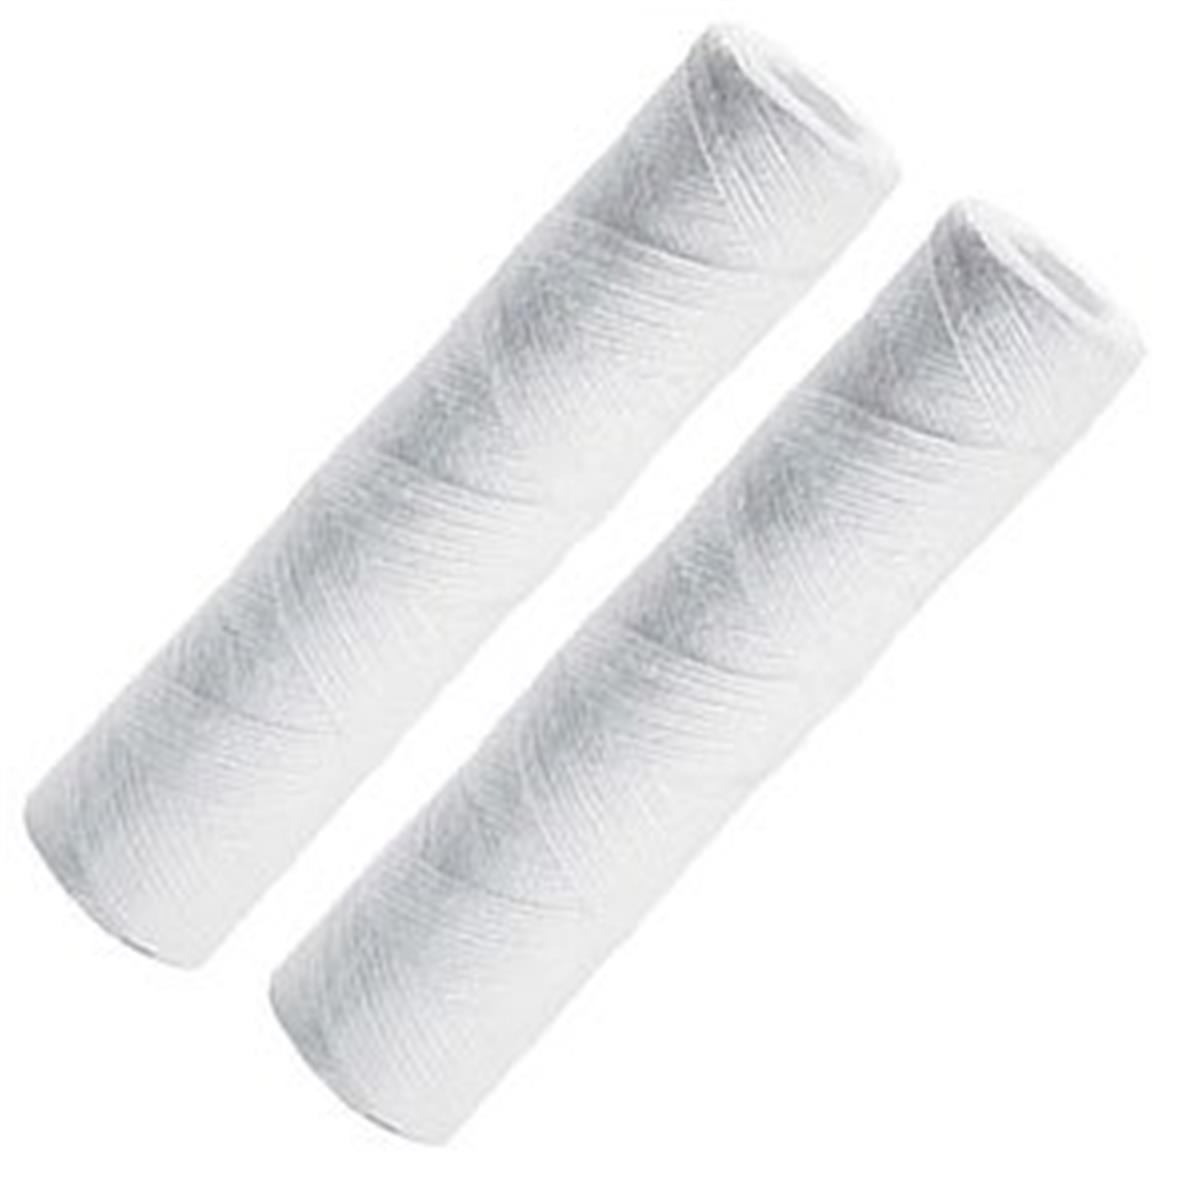 Whole House Replacement Water Filter Cartridge - Pack Of 2